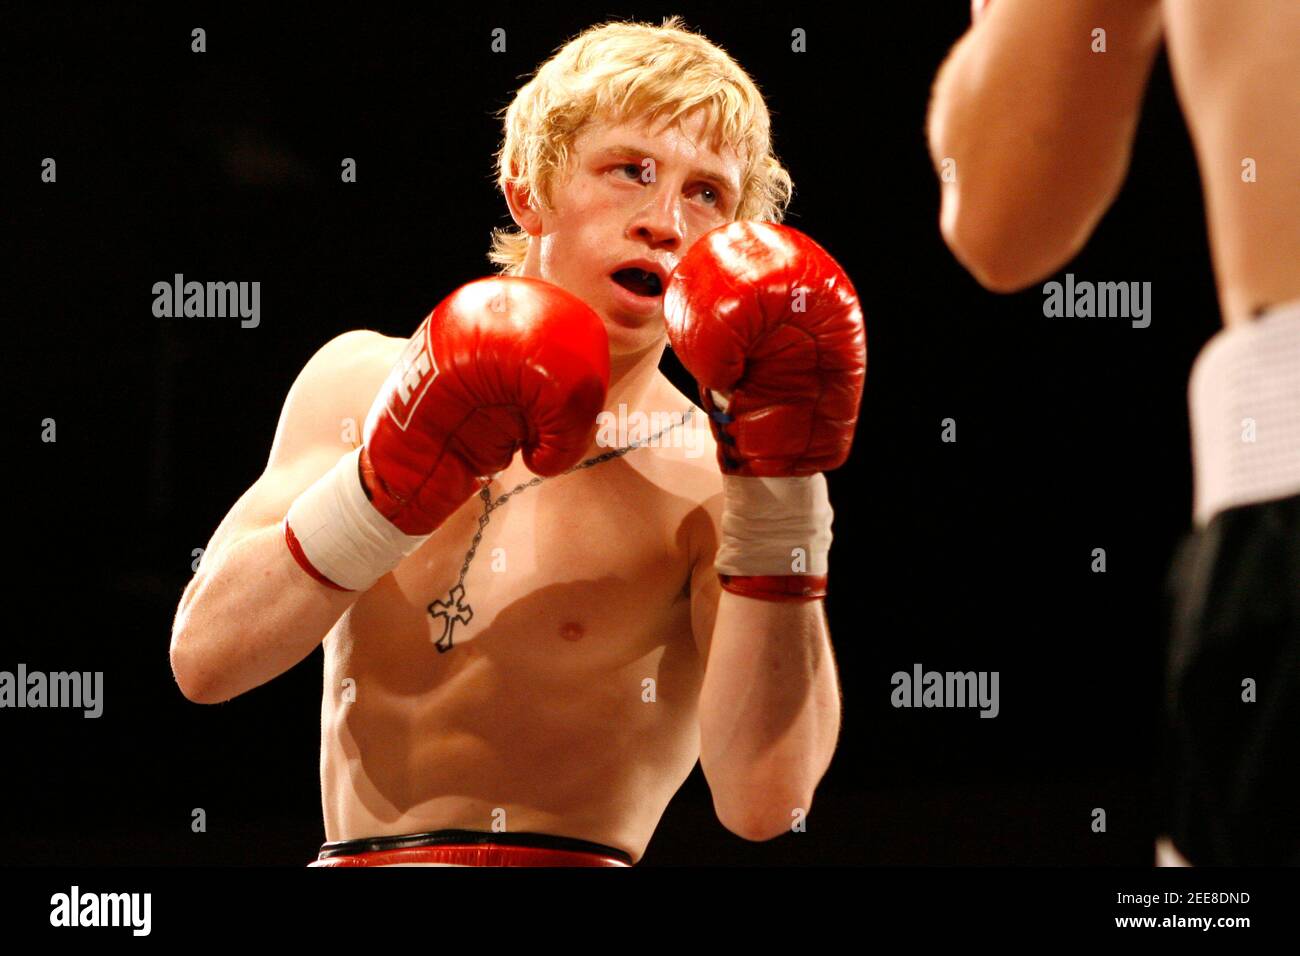 Boxing - Kirk Goodings v Pavels Senkovs - Super Featherweight - Rainton Meadows Arena, Houghton-le-Spring, Tyne and Wear - 23/7/10  Kirk Goodings in action  Mandatory Credit: Action Images / Ed Sykes Stock Photo